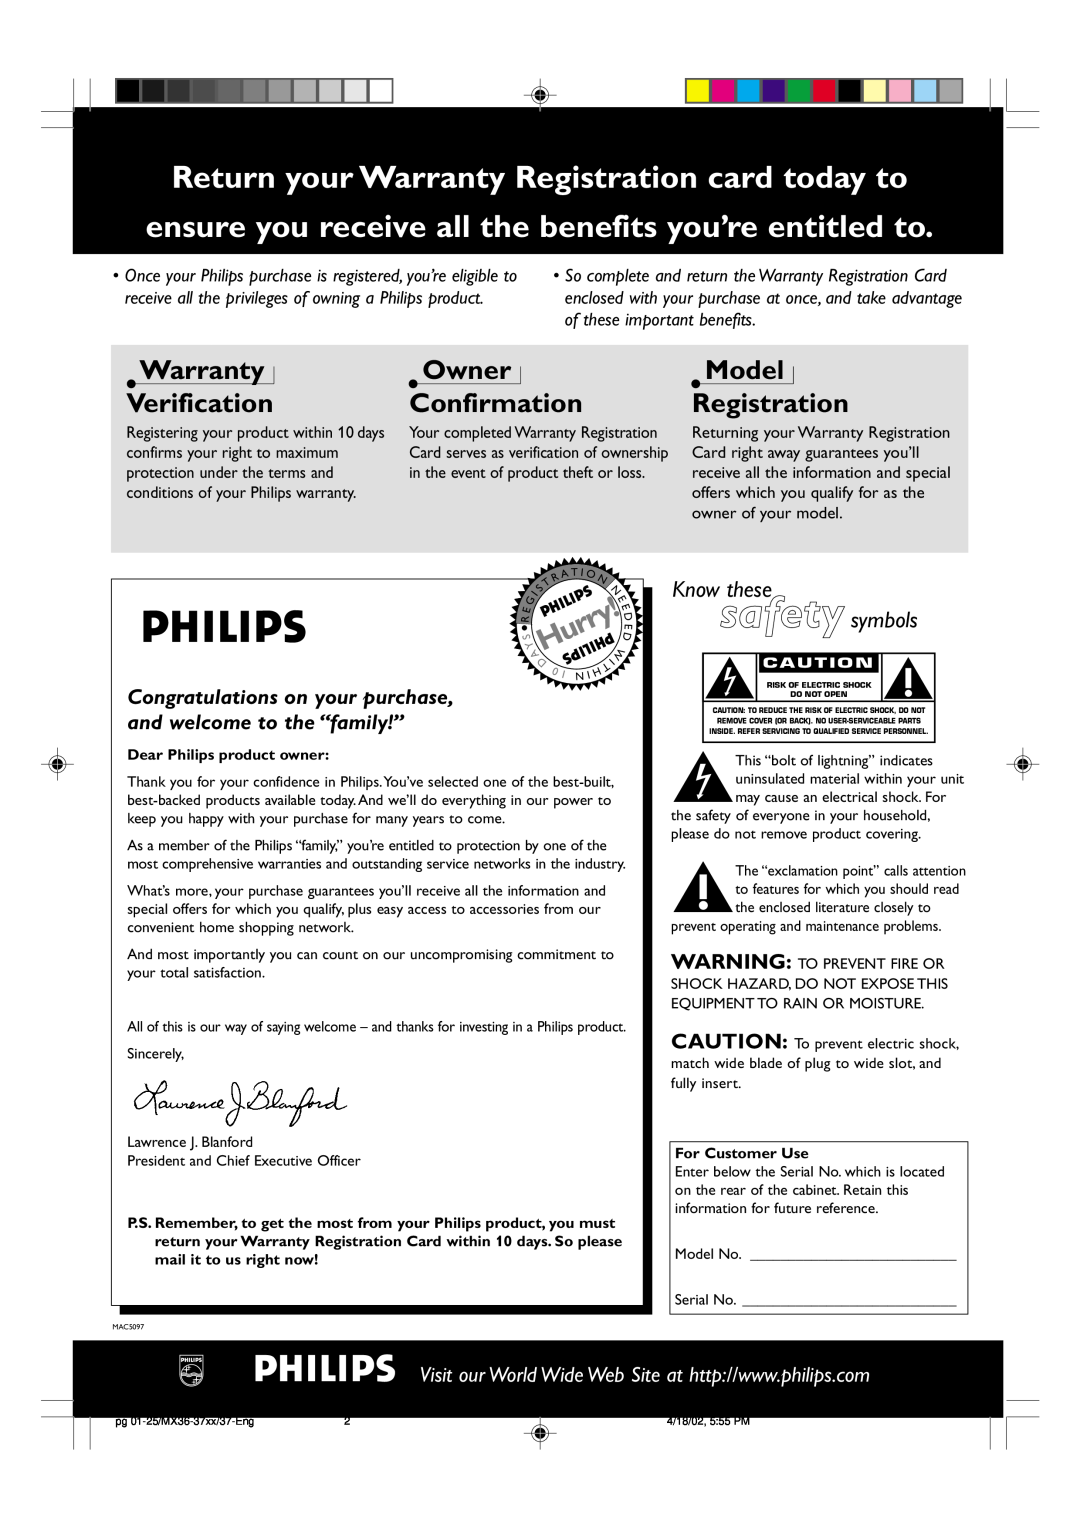 Philips MX-3700D warranty Return your Warranty Registration card today to, Warranty Verification, Owner Confirmation, Hurry 